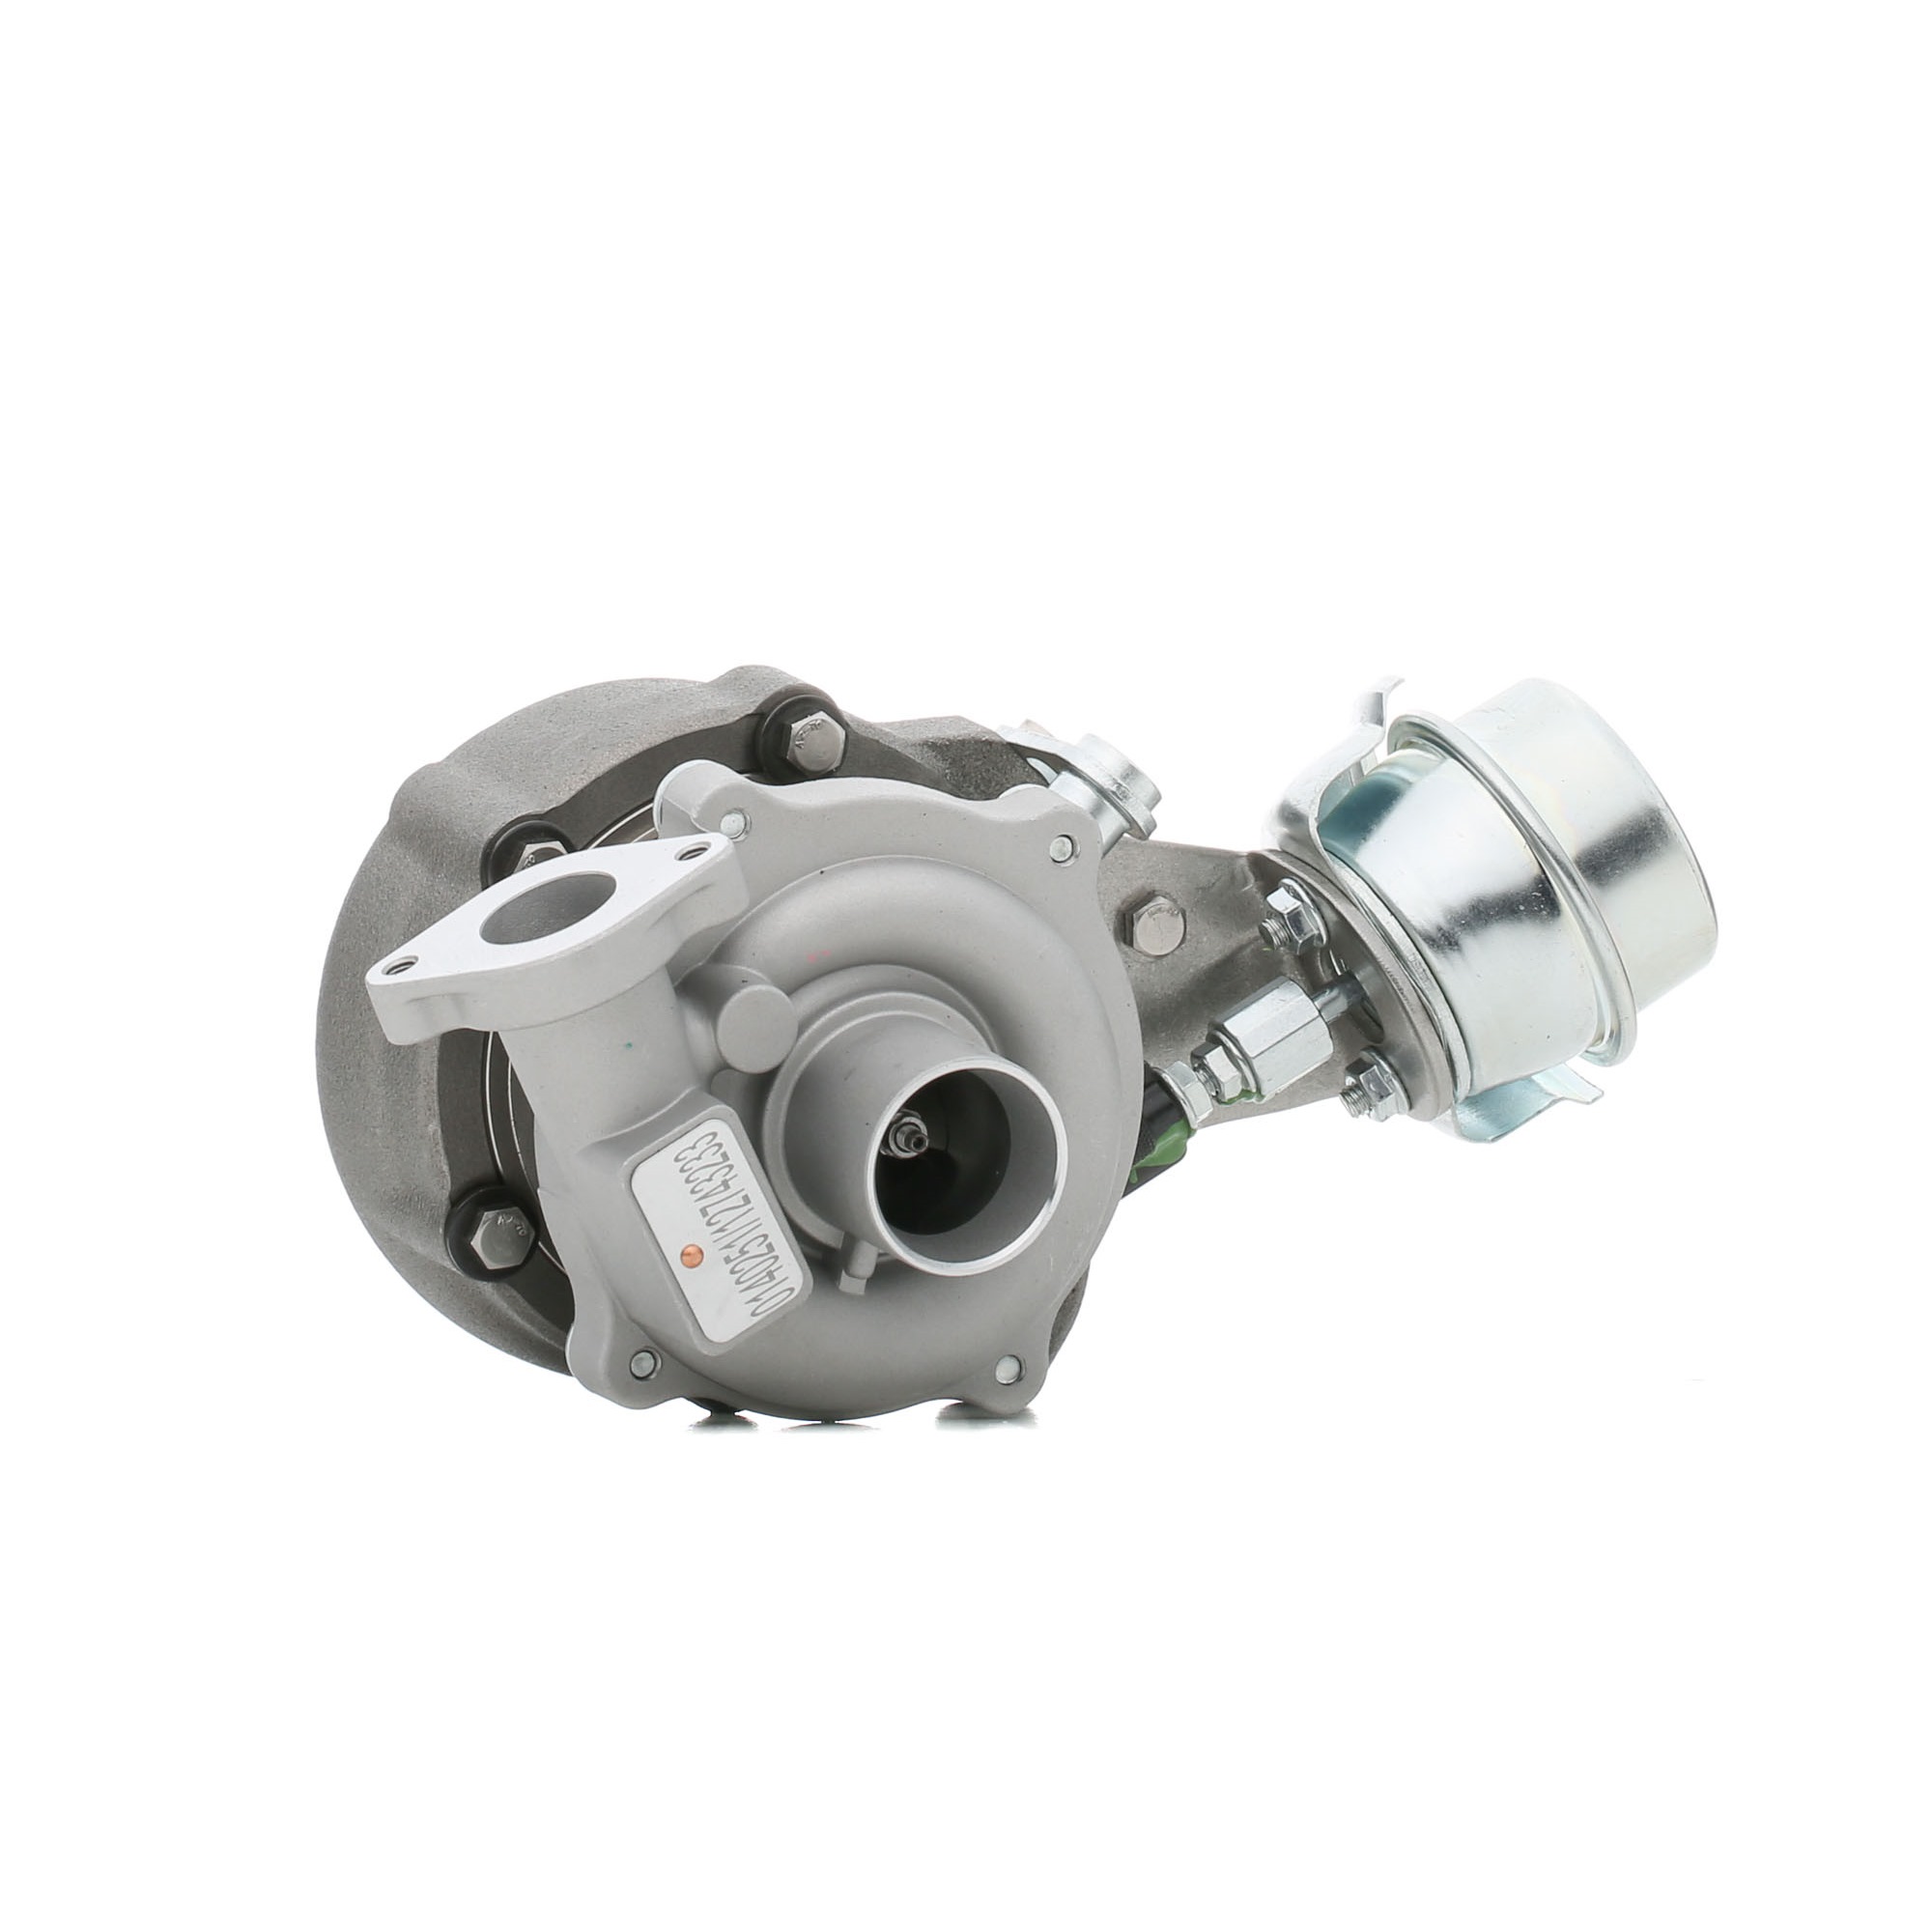 STARK SKCT-1190076 Turbocharger Exhaust Turbocharger, without attachment material